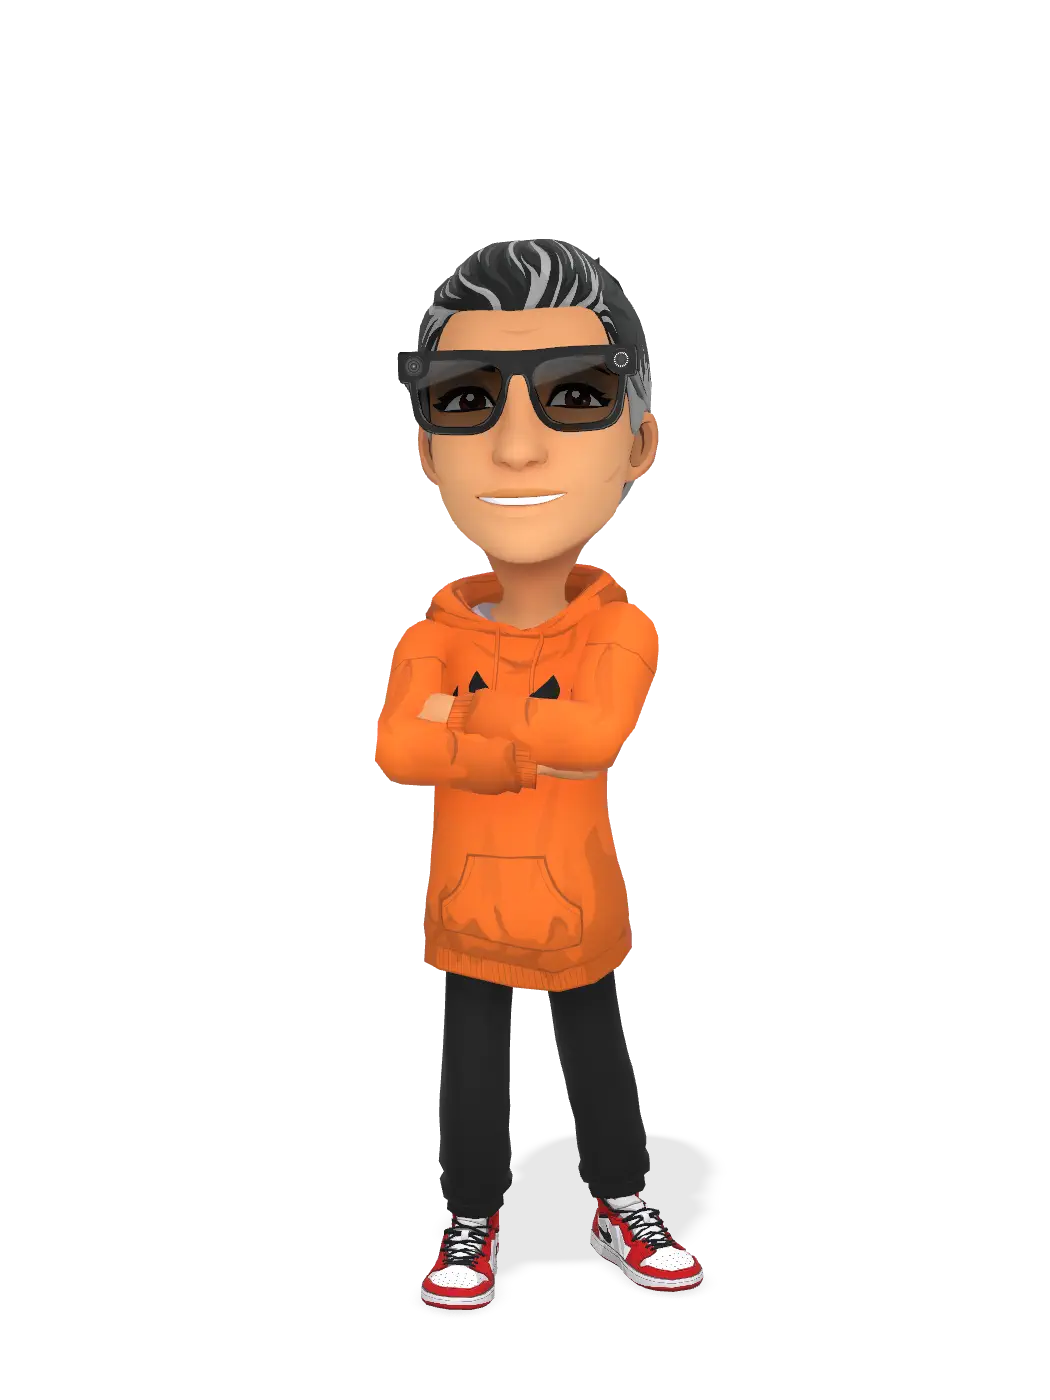 3D Bitmoji for gued20172